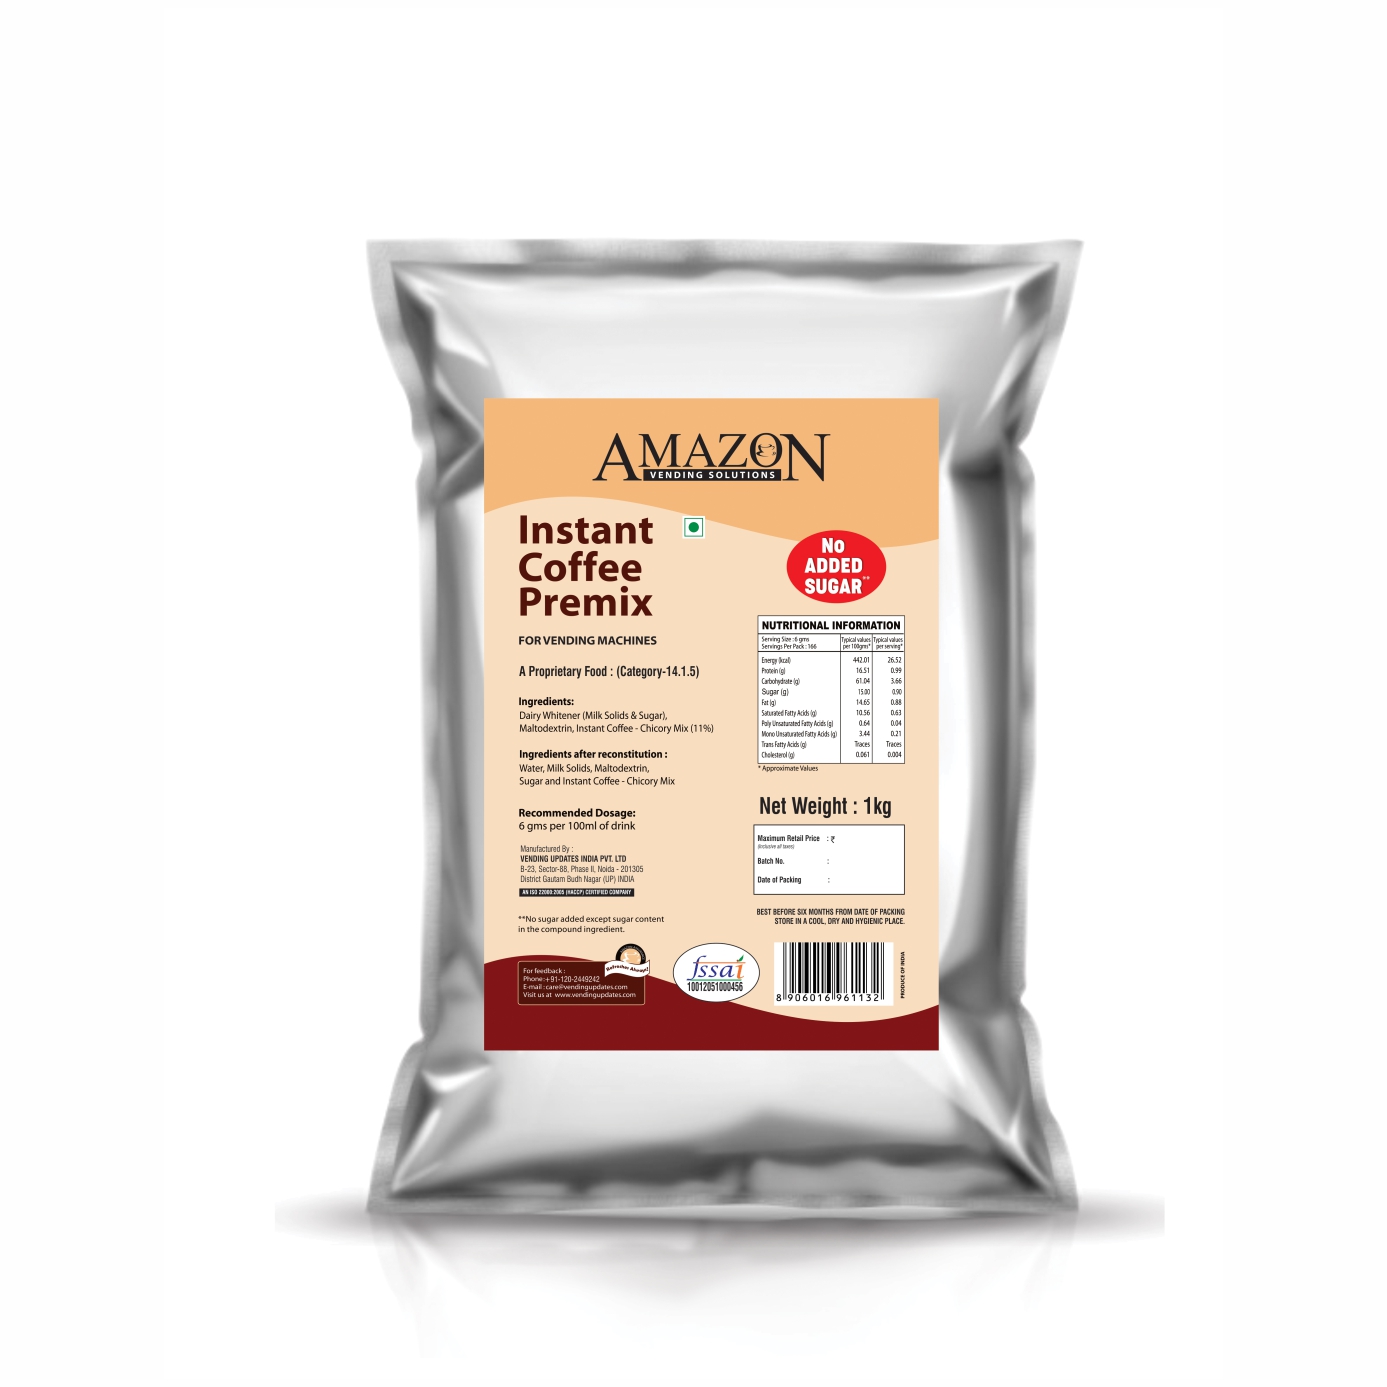 Amazon 3 in 1 Instant Coffee Premix with No Added Sugar